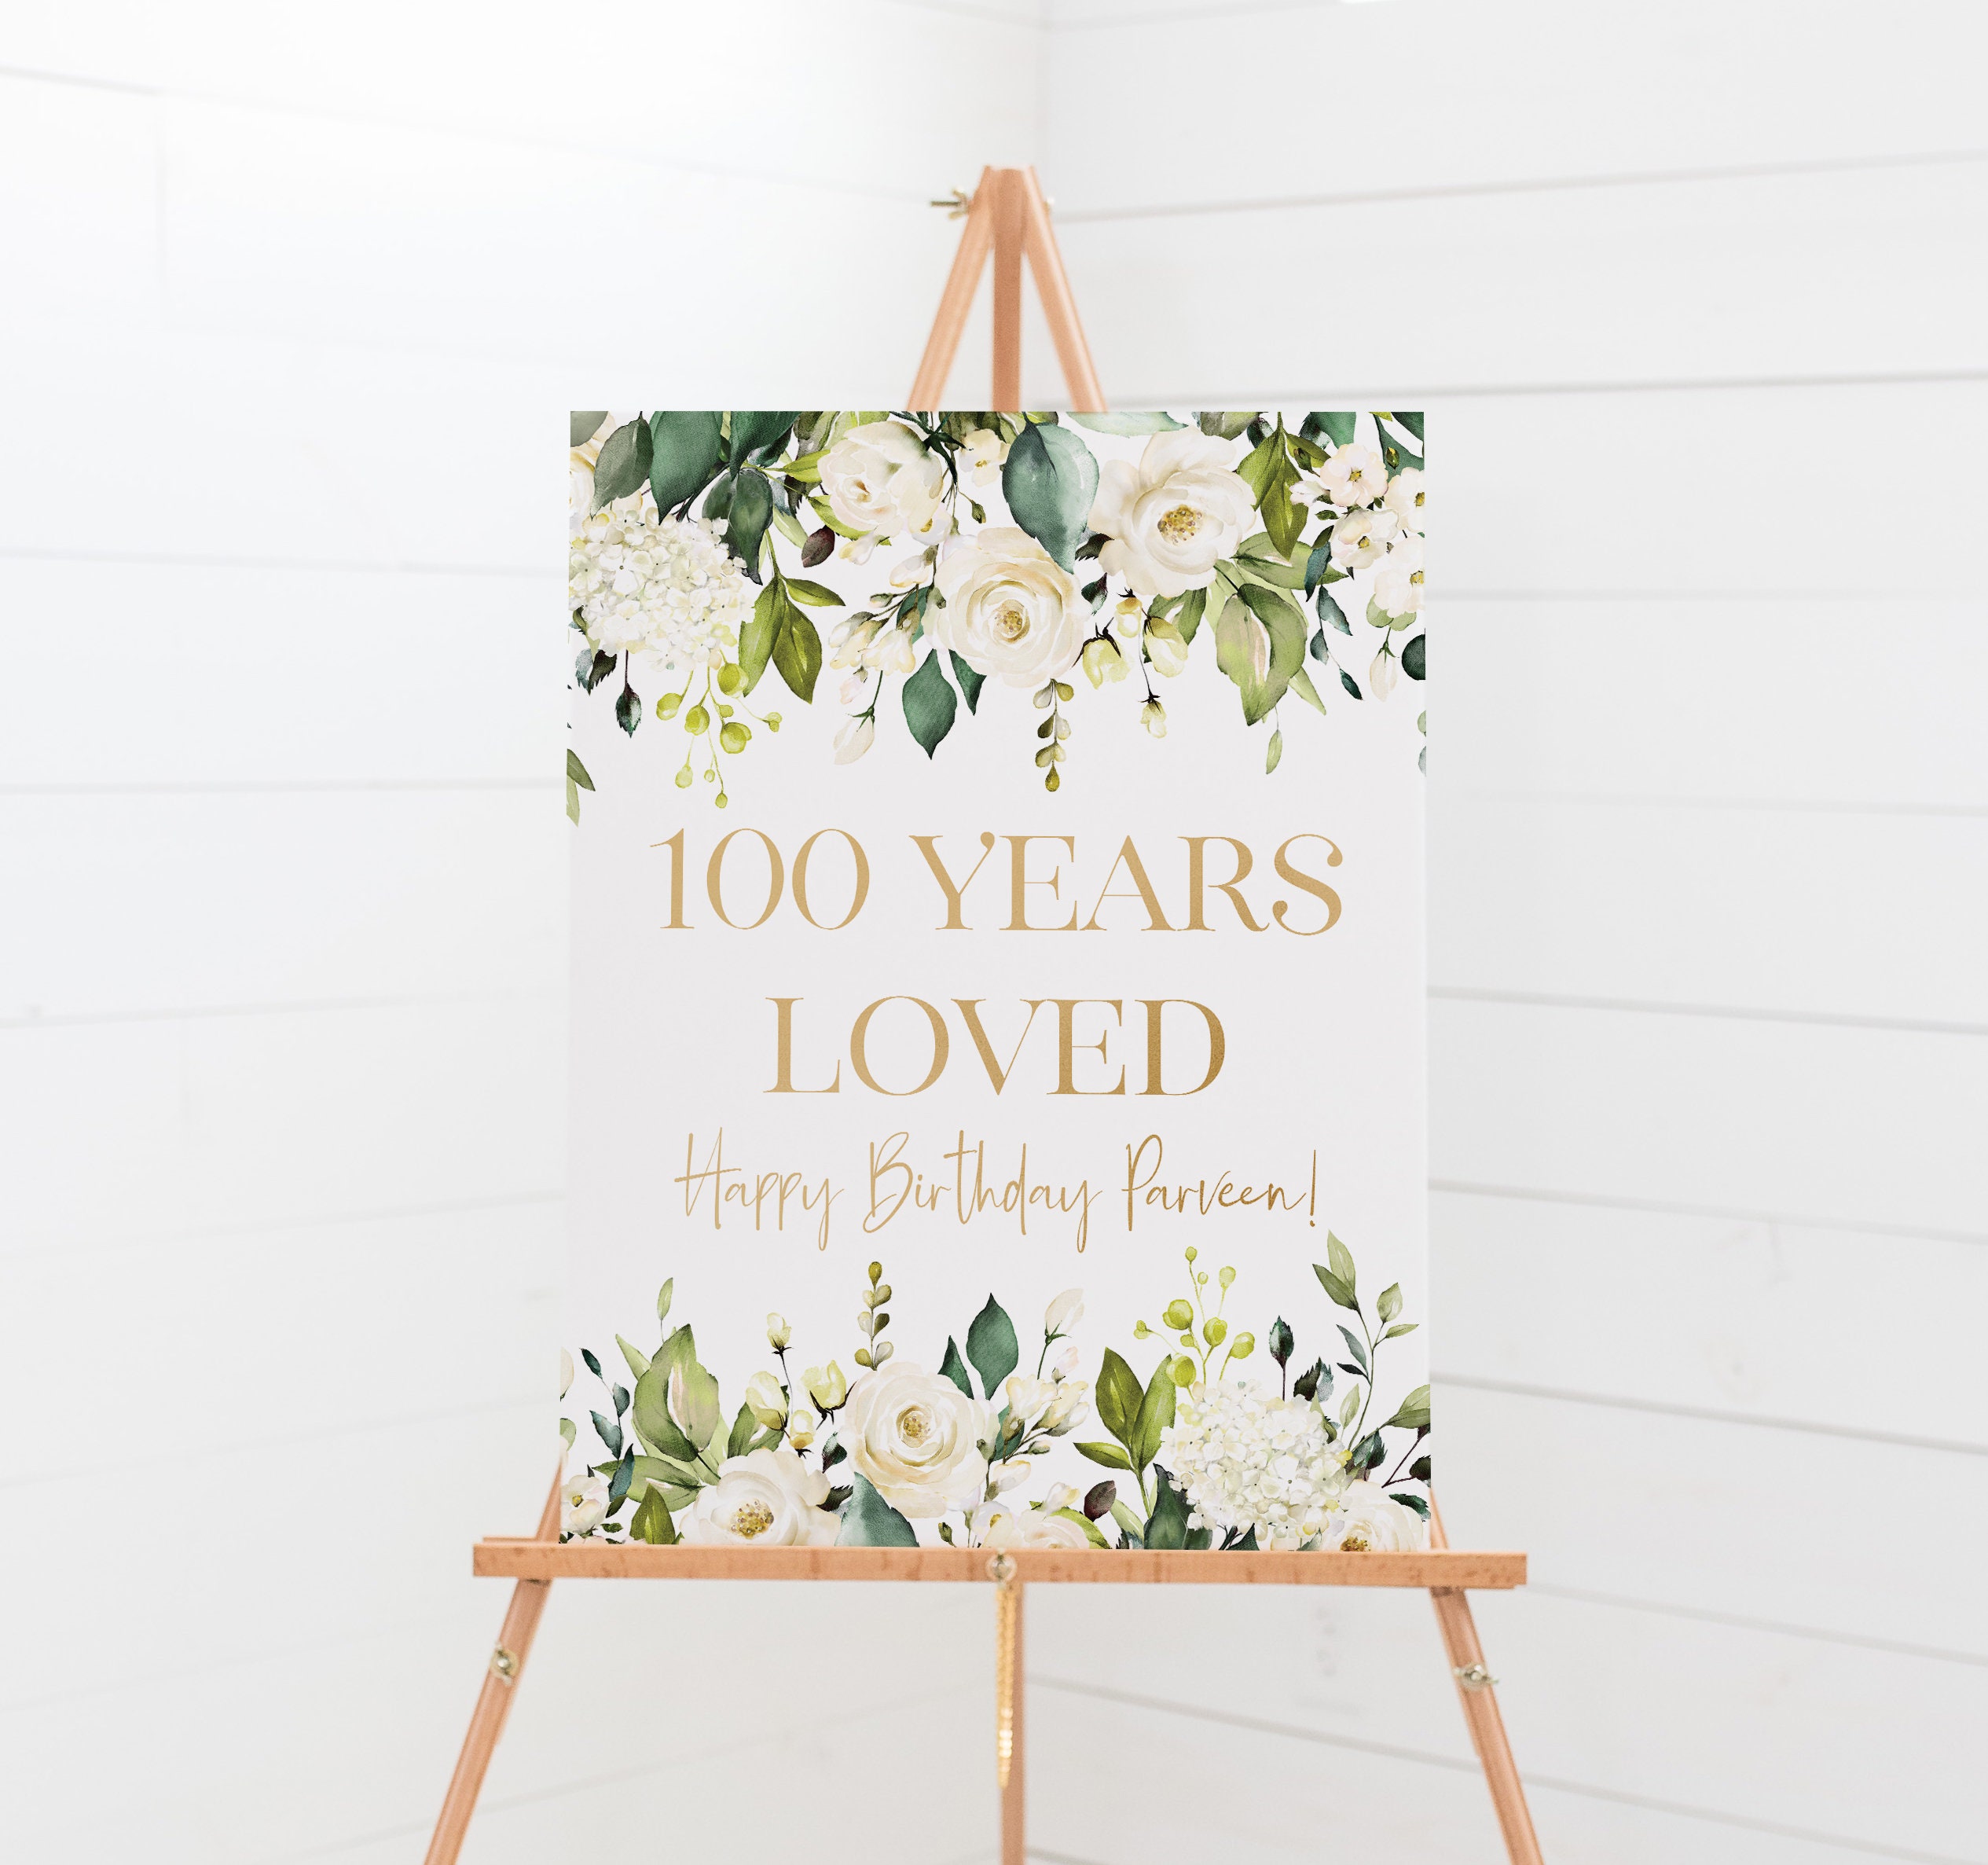 Personalized 60th Anniversary Gift for Grandparents, Custom 60th Wedding  Anniversary Sign PRINTABLE 60 Years Diamond Anniversary or ANY YEAR 